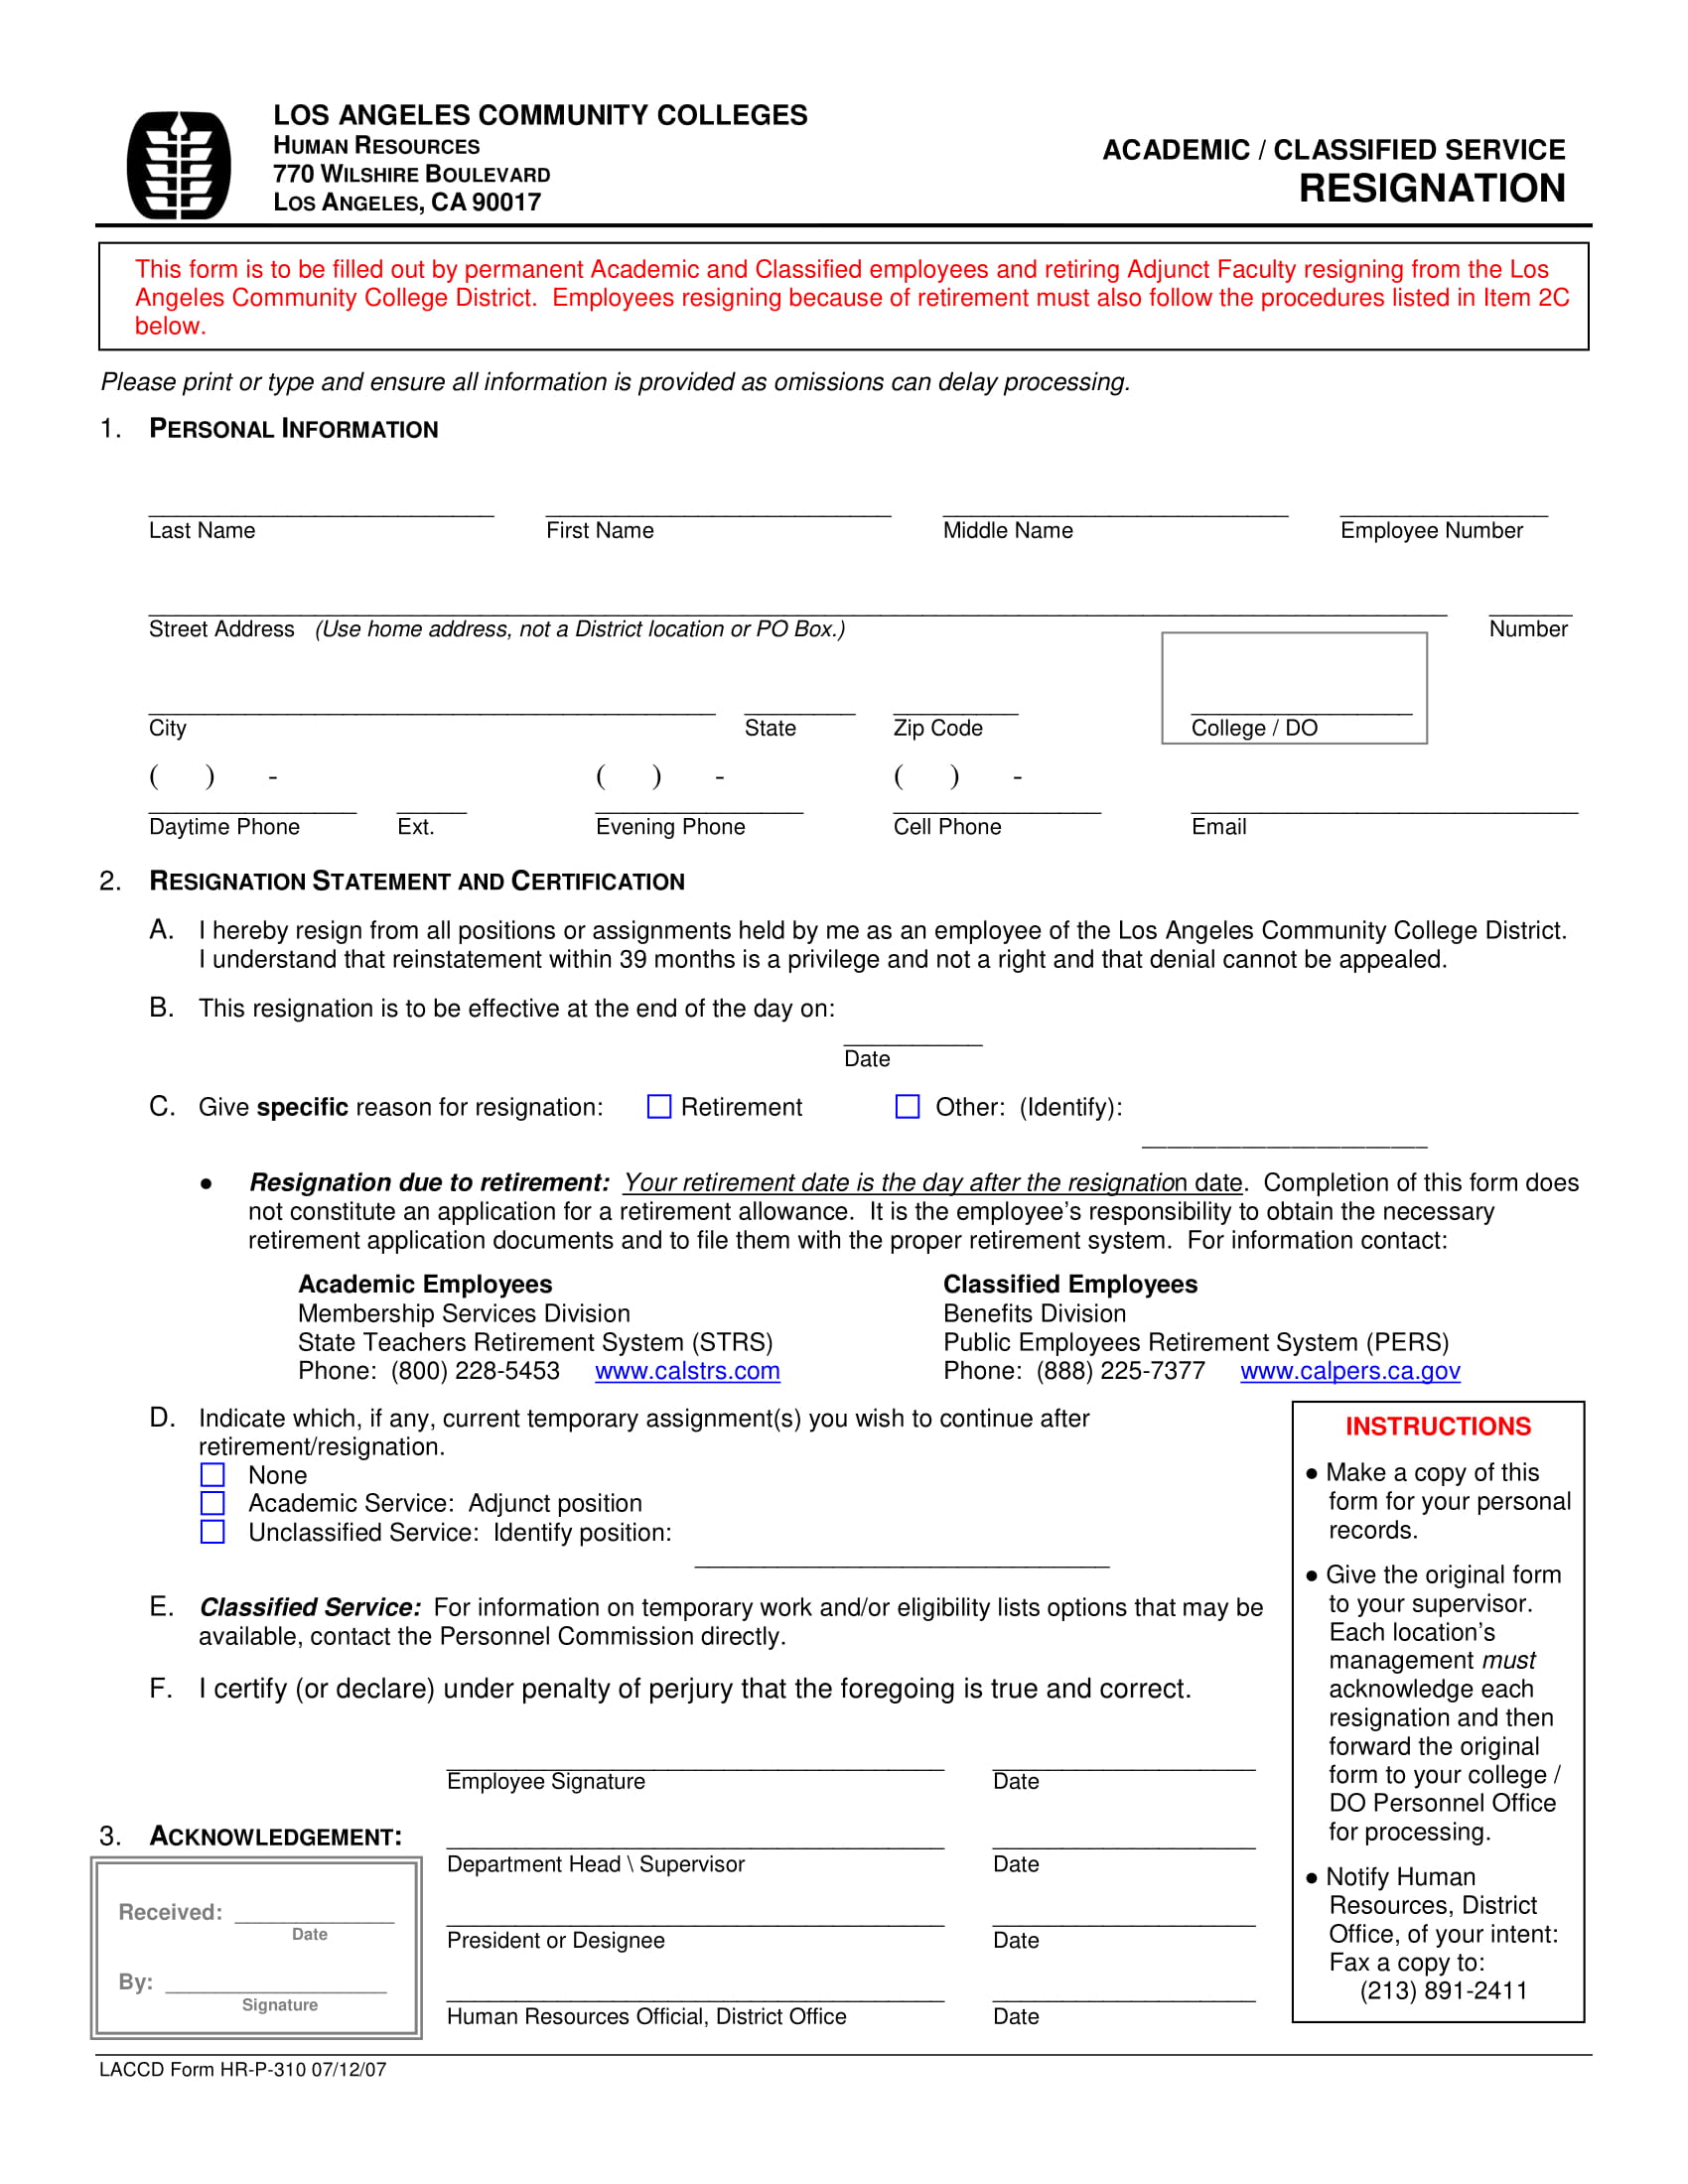 faculty resignation form example